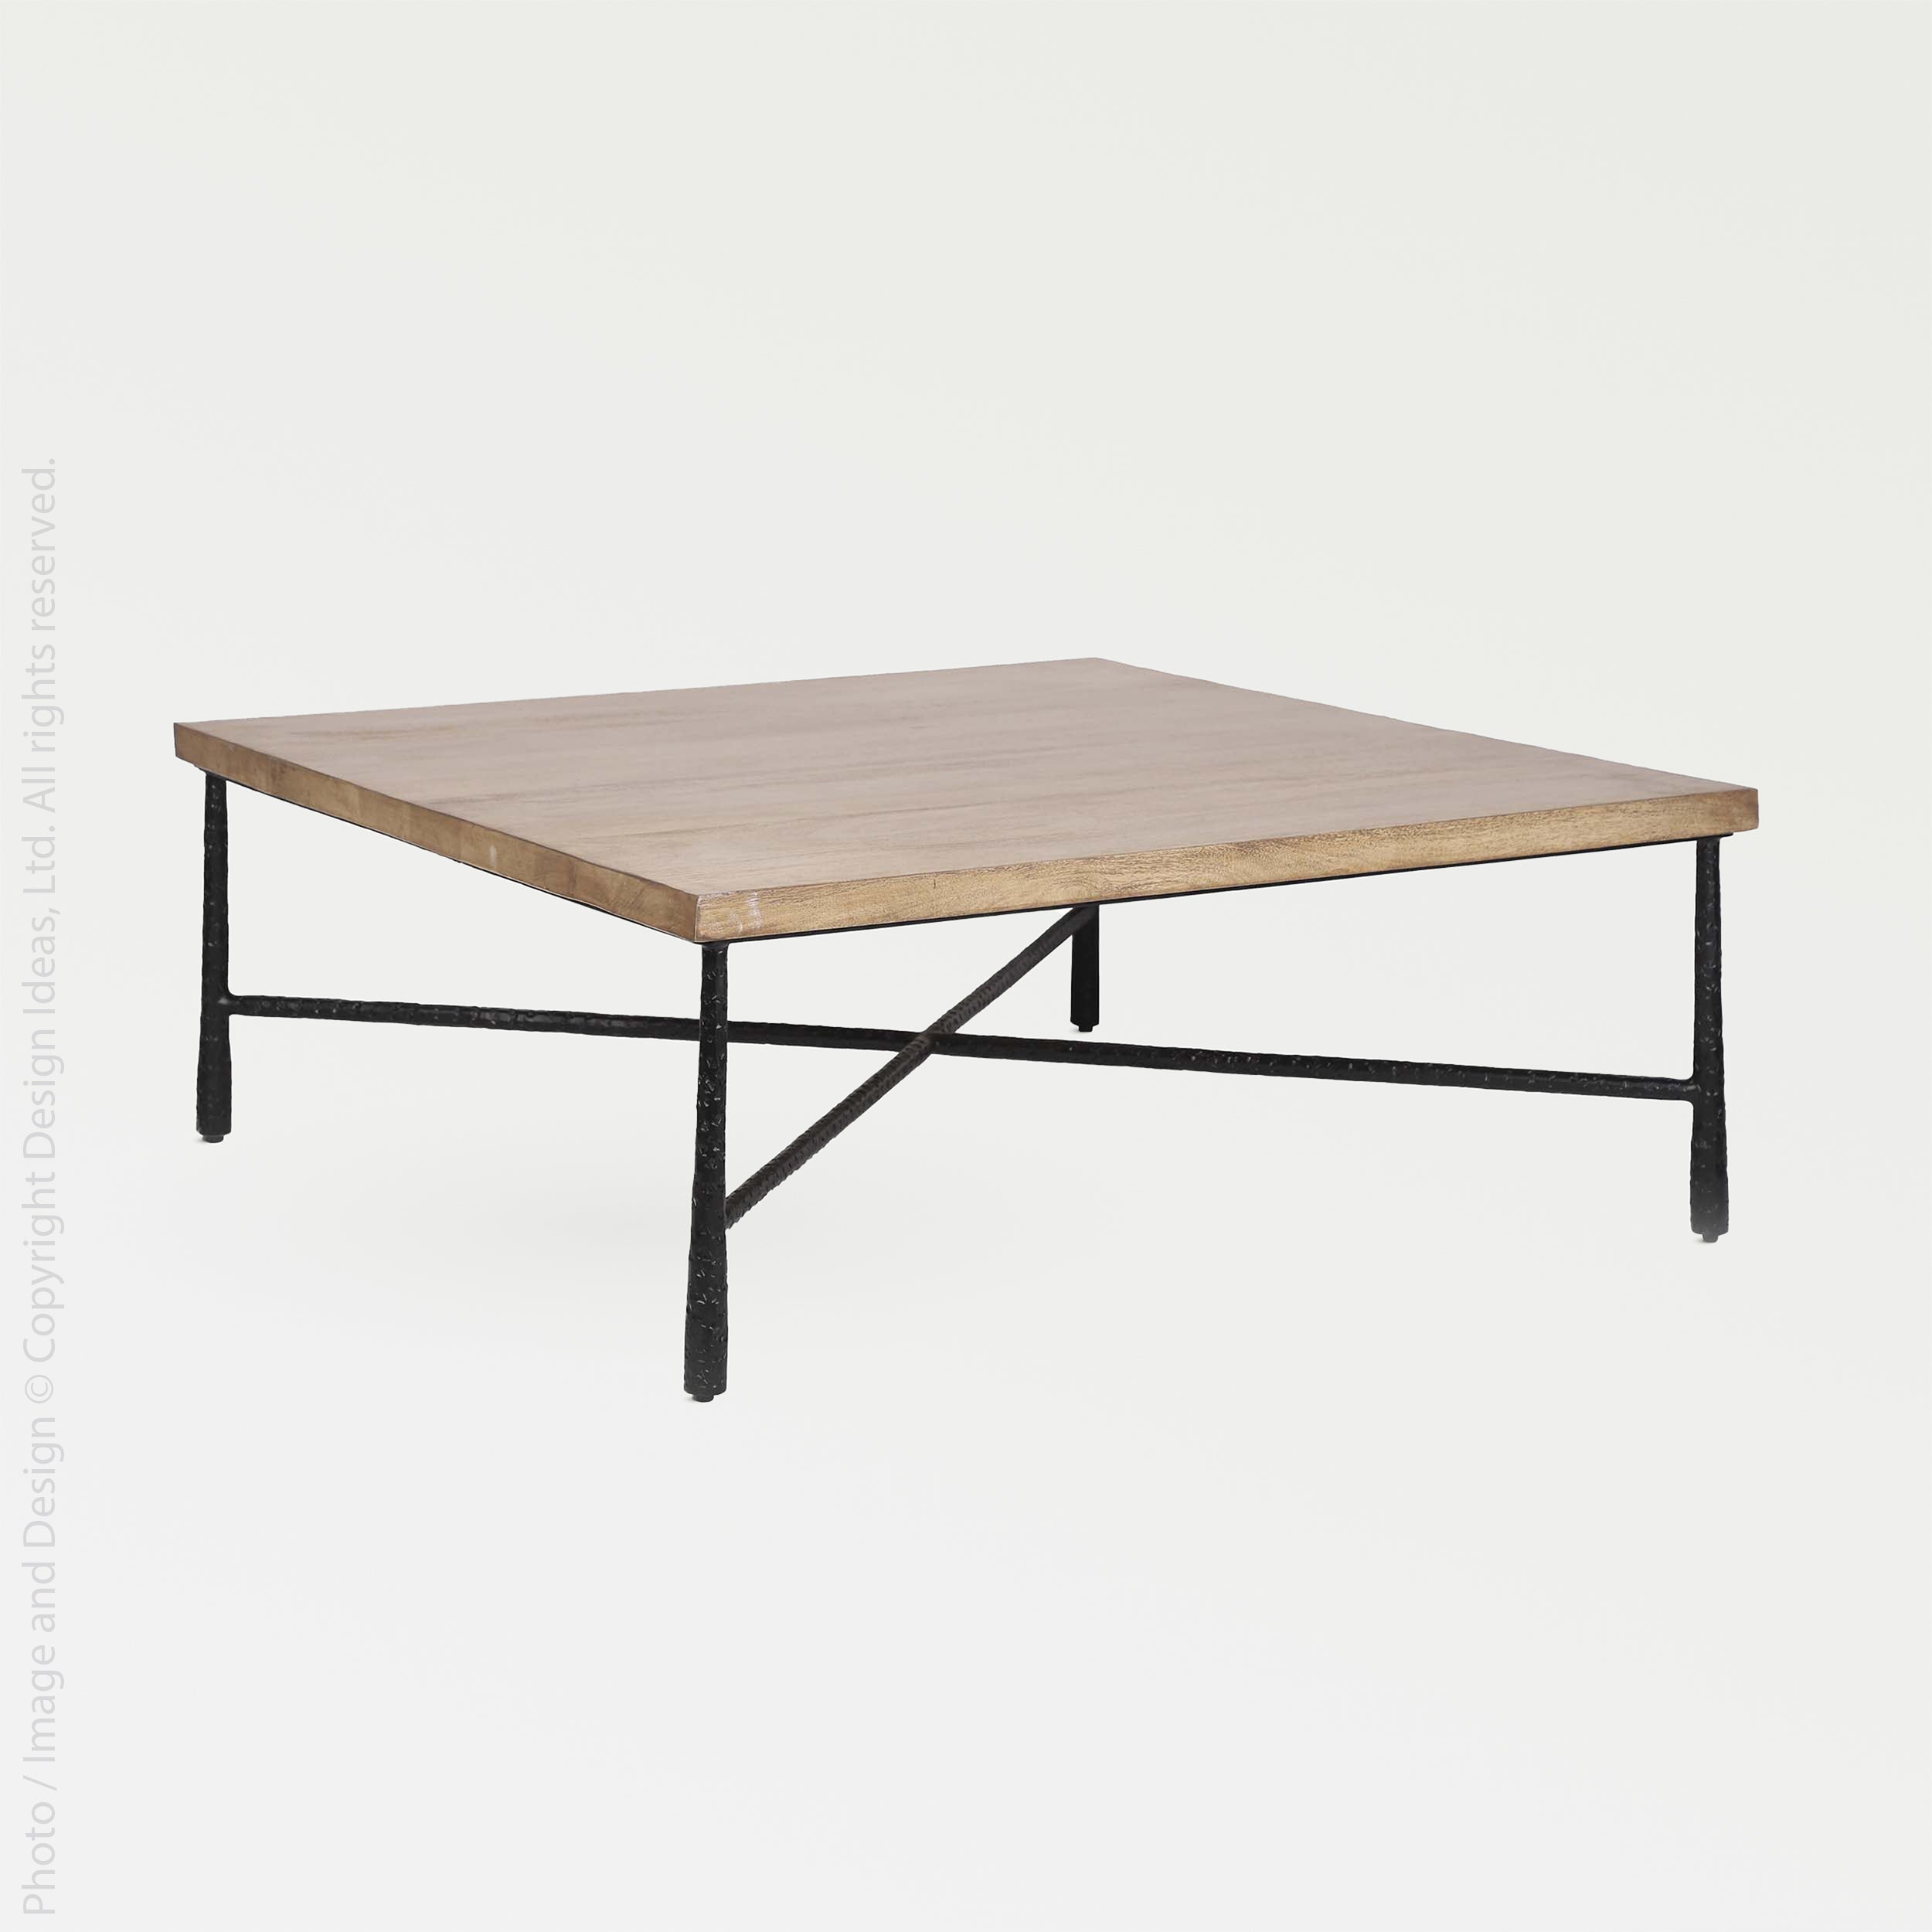 Valea™ Mango Wood Coffee Table - Natural | Image 1 | Premium Table from the Valea collection | made with Mango Wood for long lasting use | texxture